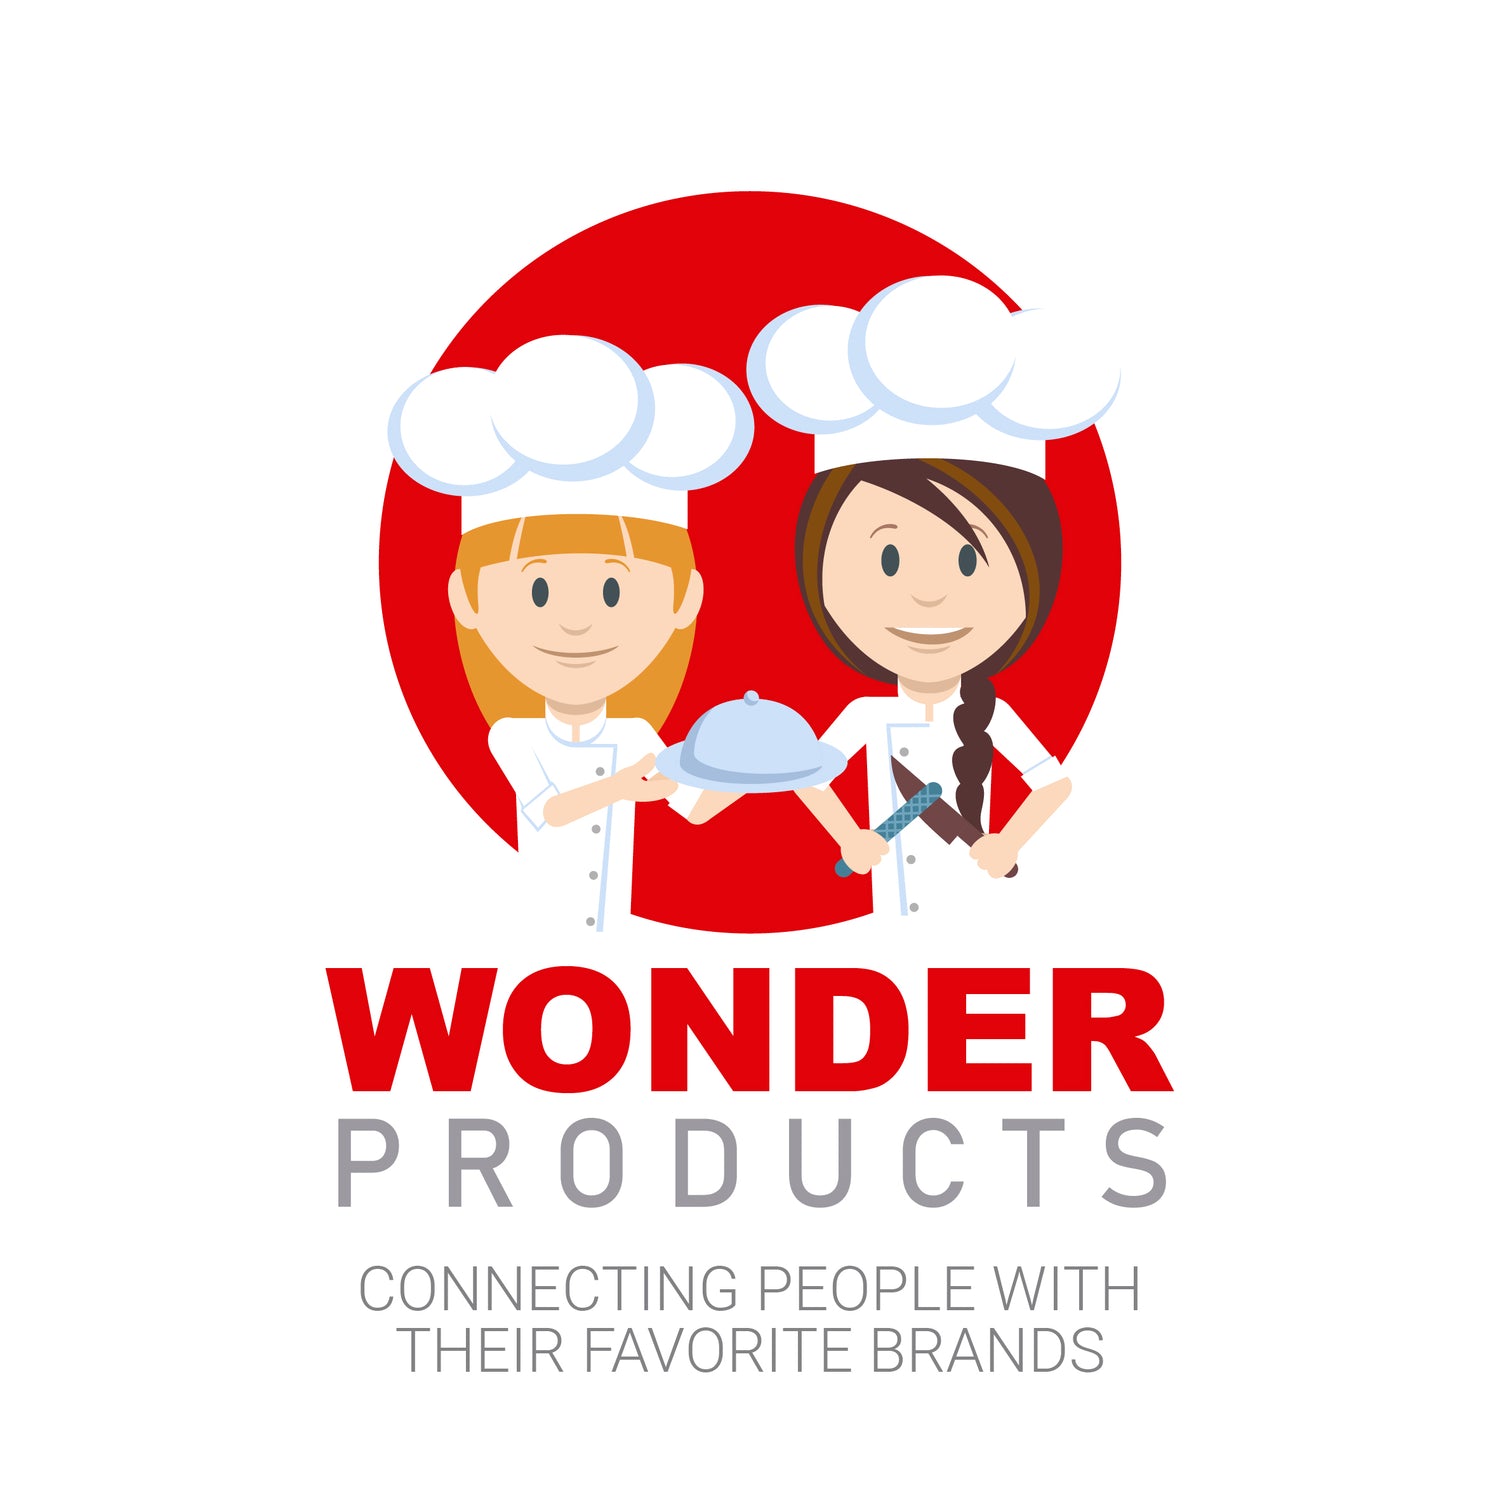 Connecting people with their favorite brands. Welcome to a WONDERful world of traditional brands